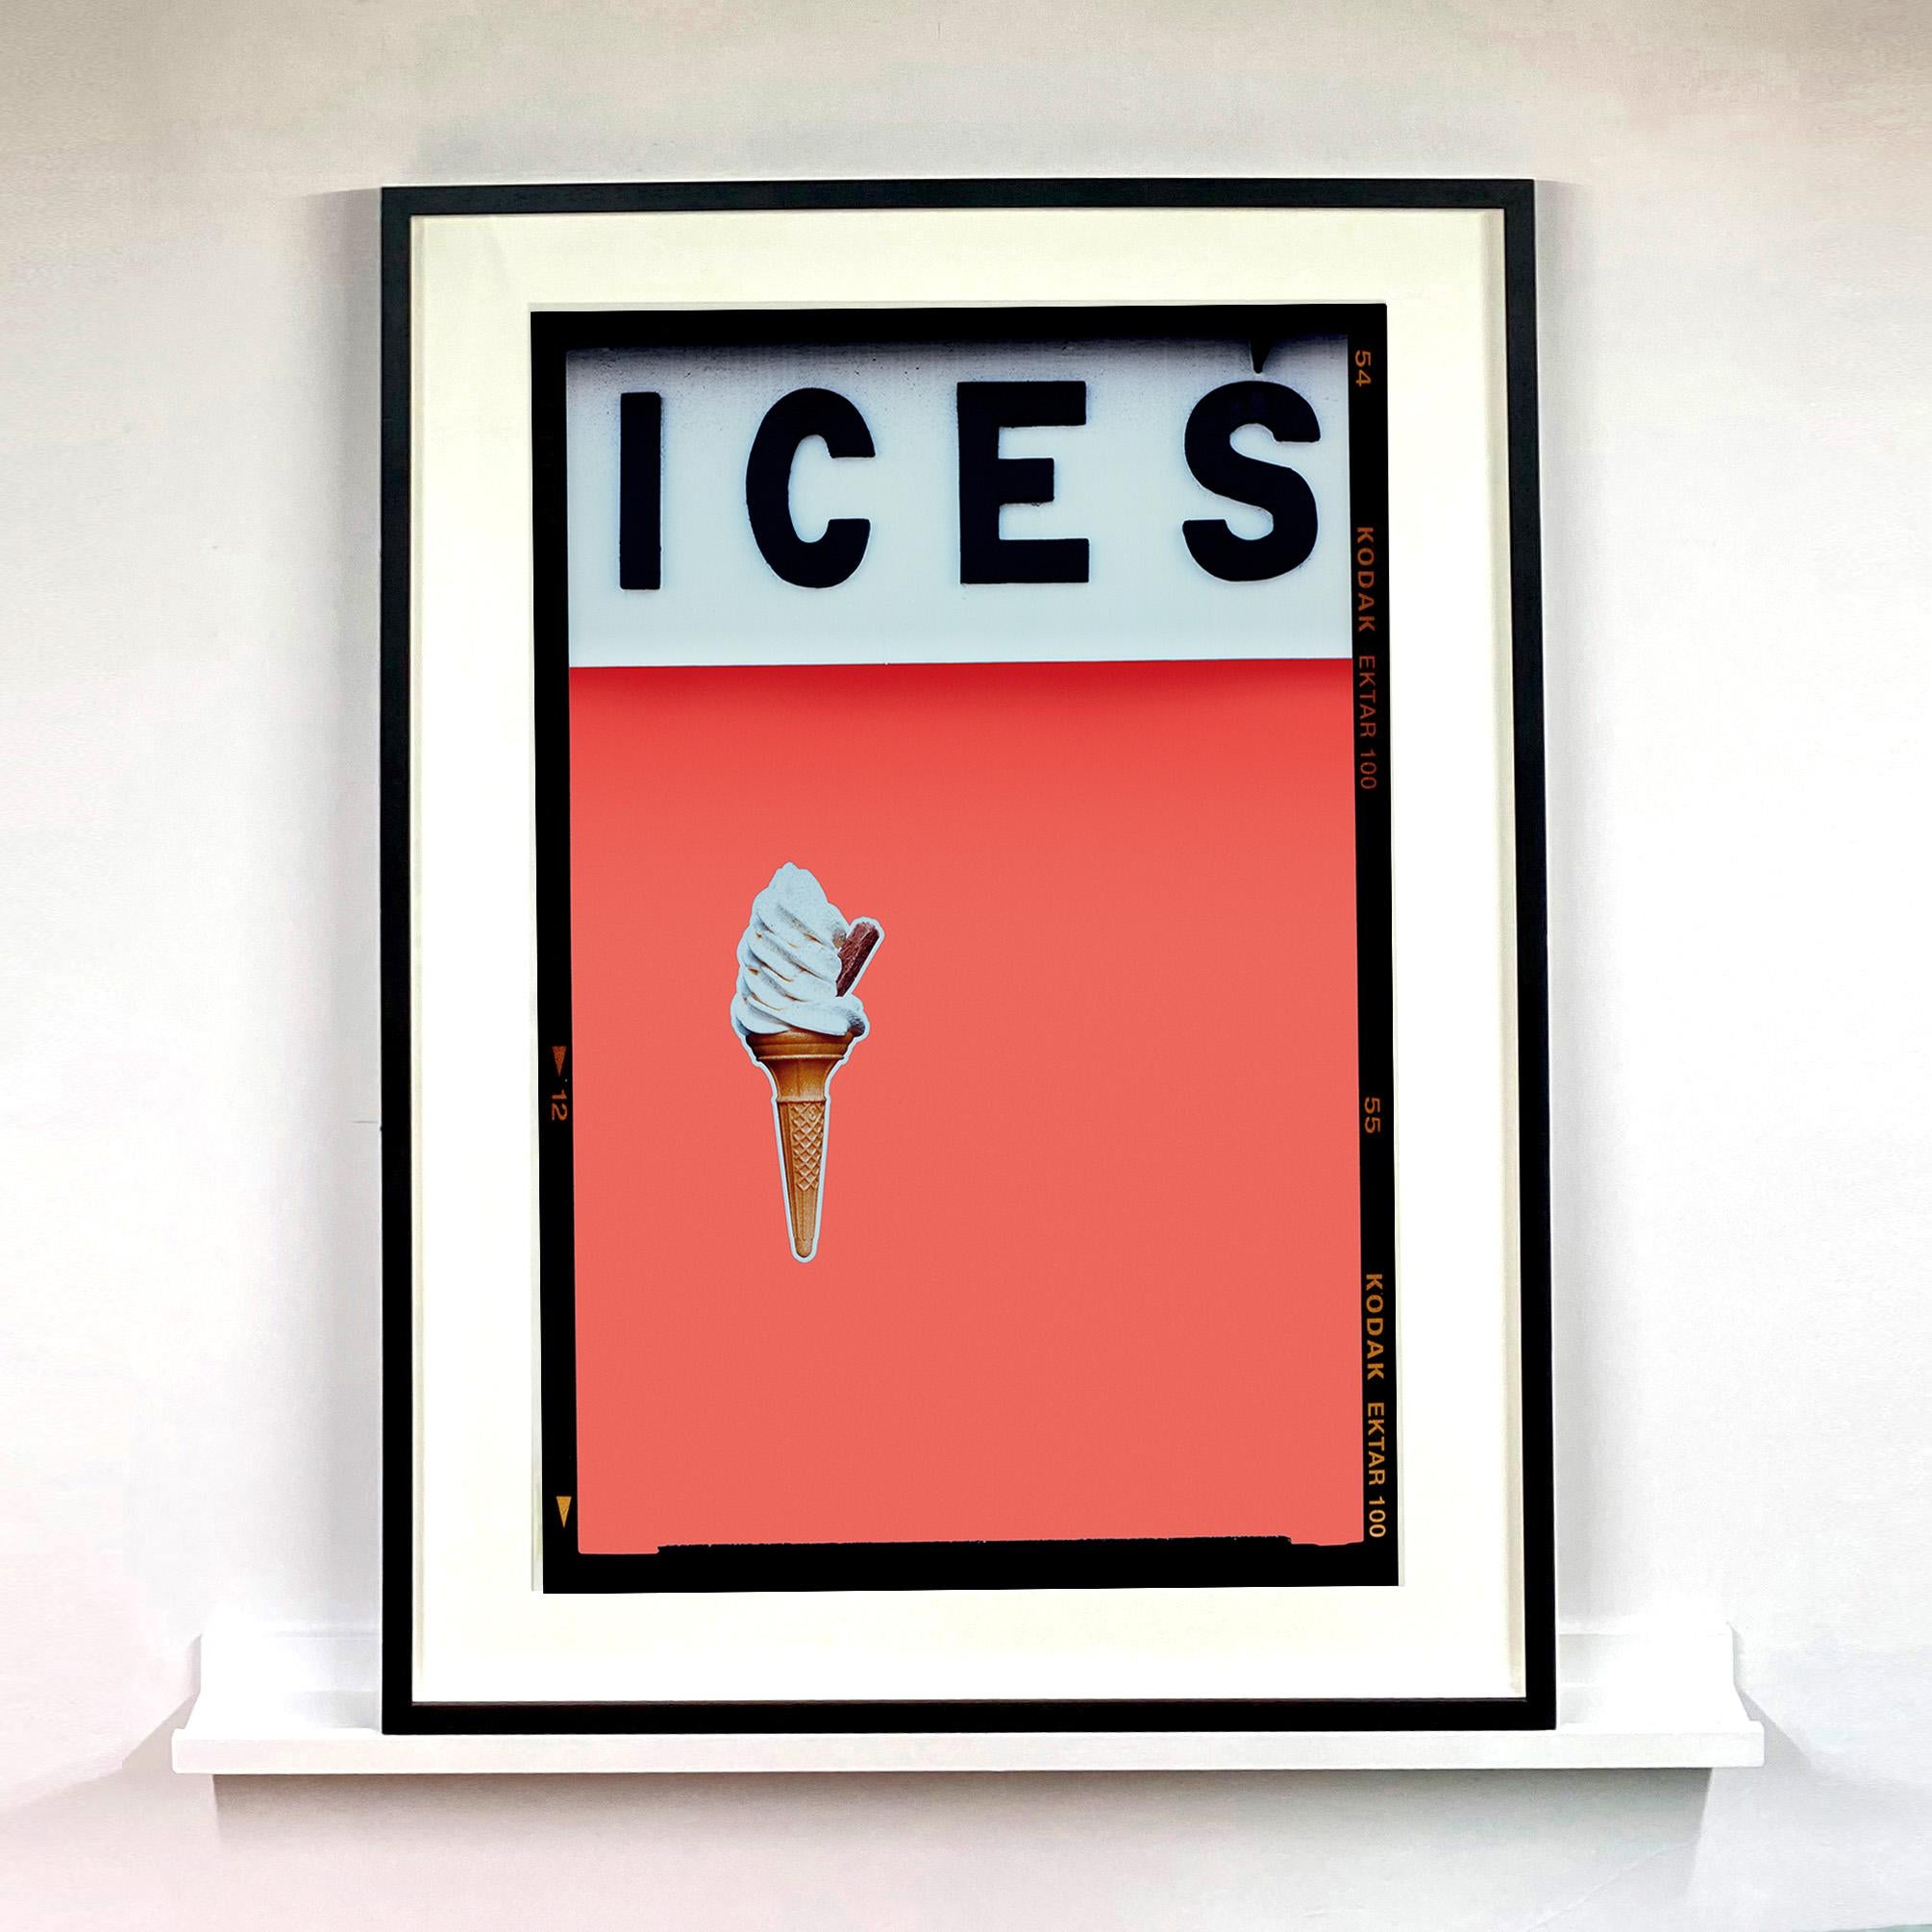 Ices (Melondrama), Bexhill-on-Sea - British seaside color photography - Pop Art Print by Richard Heeps